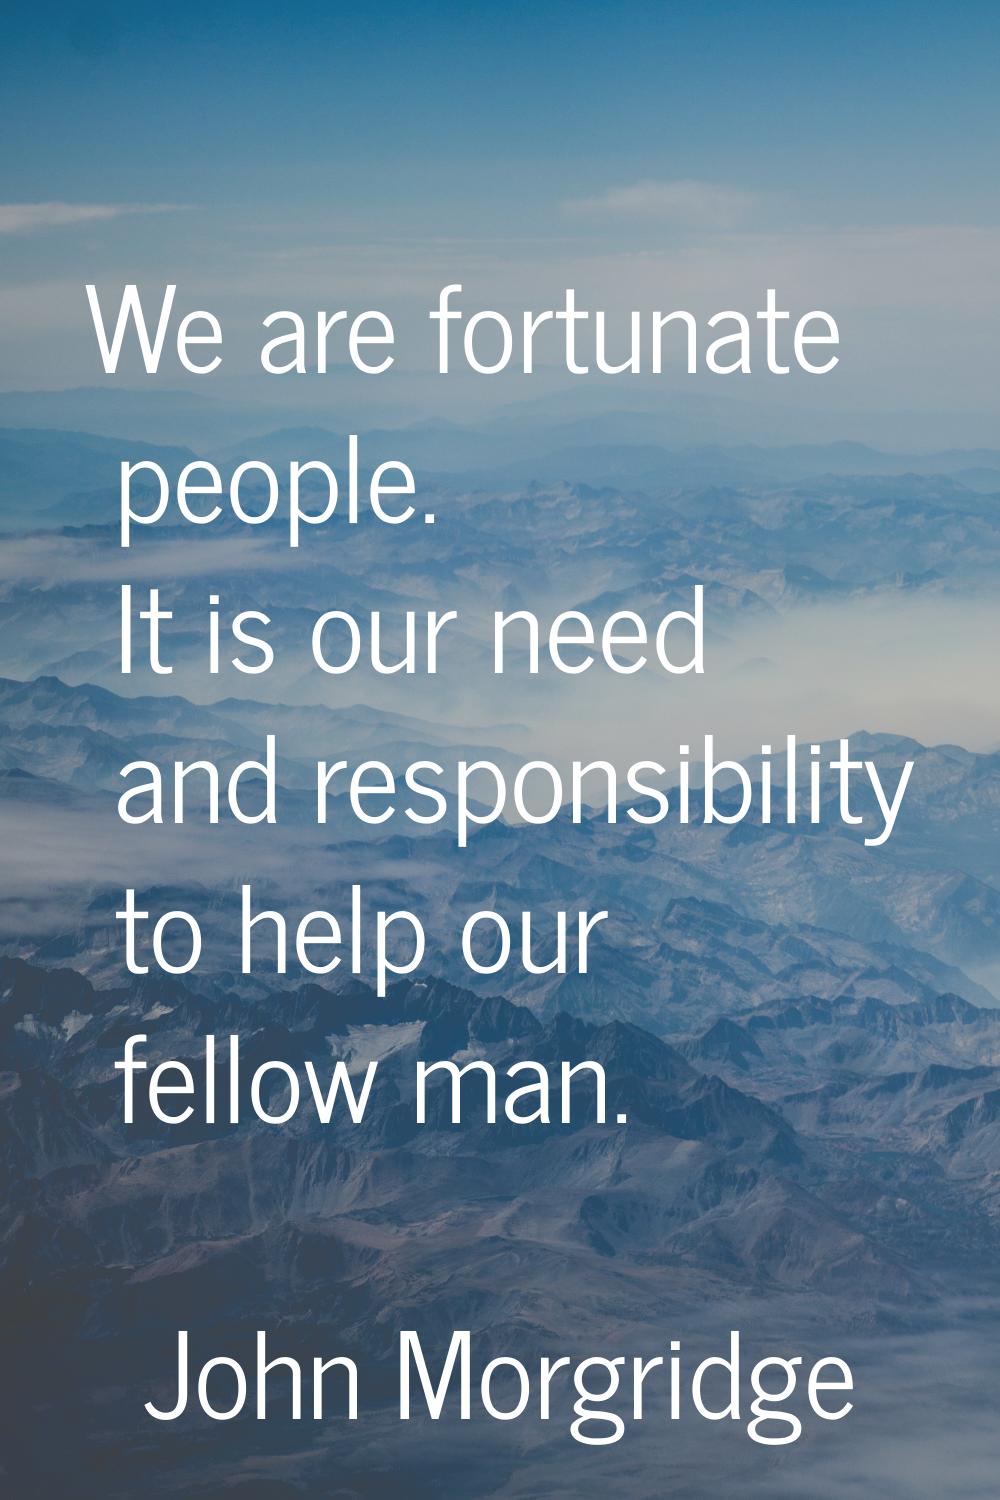 We are fortunate people. It is our need and responsibility to help our fellow man.